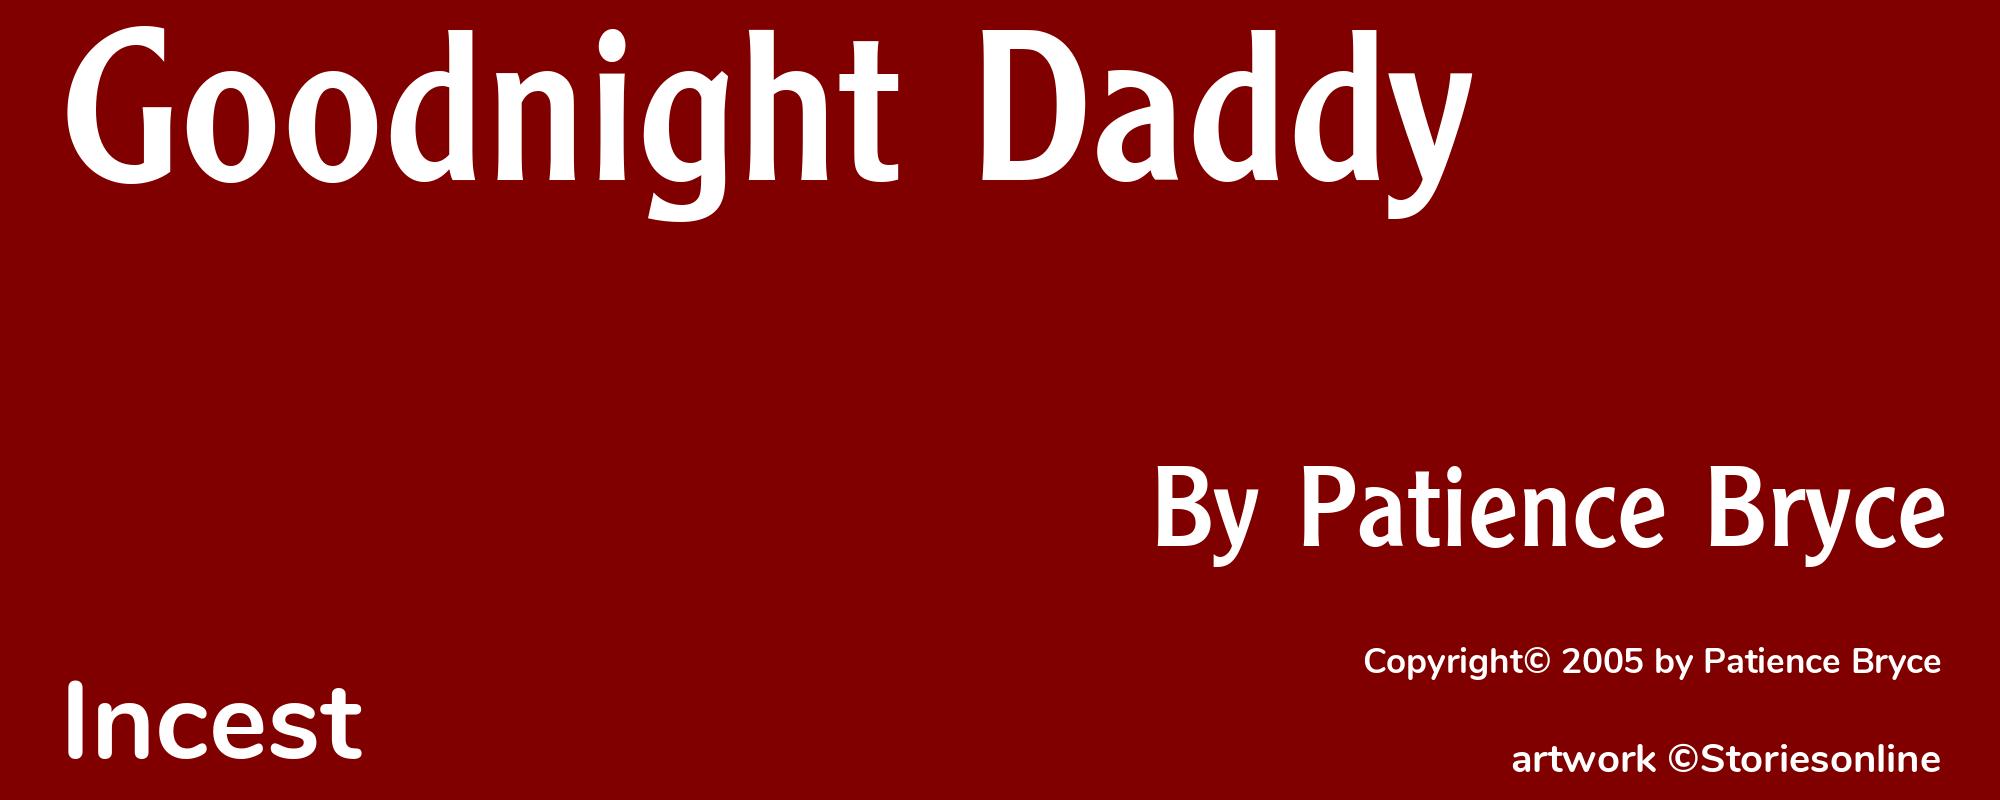 Goodnight Daddy - Cover